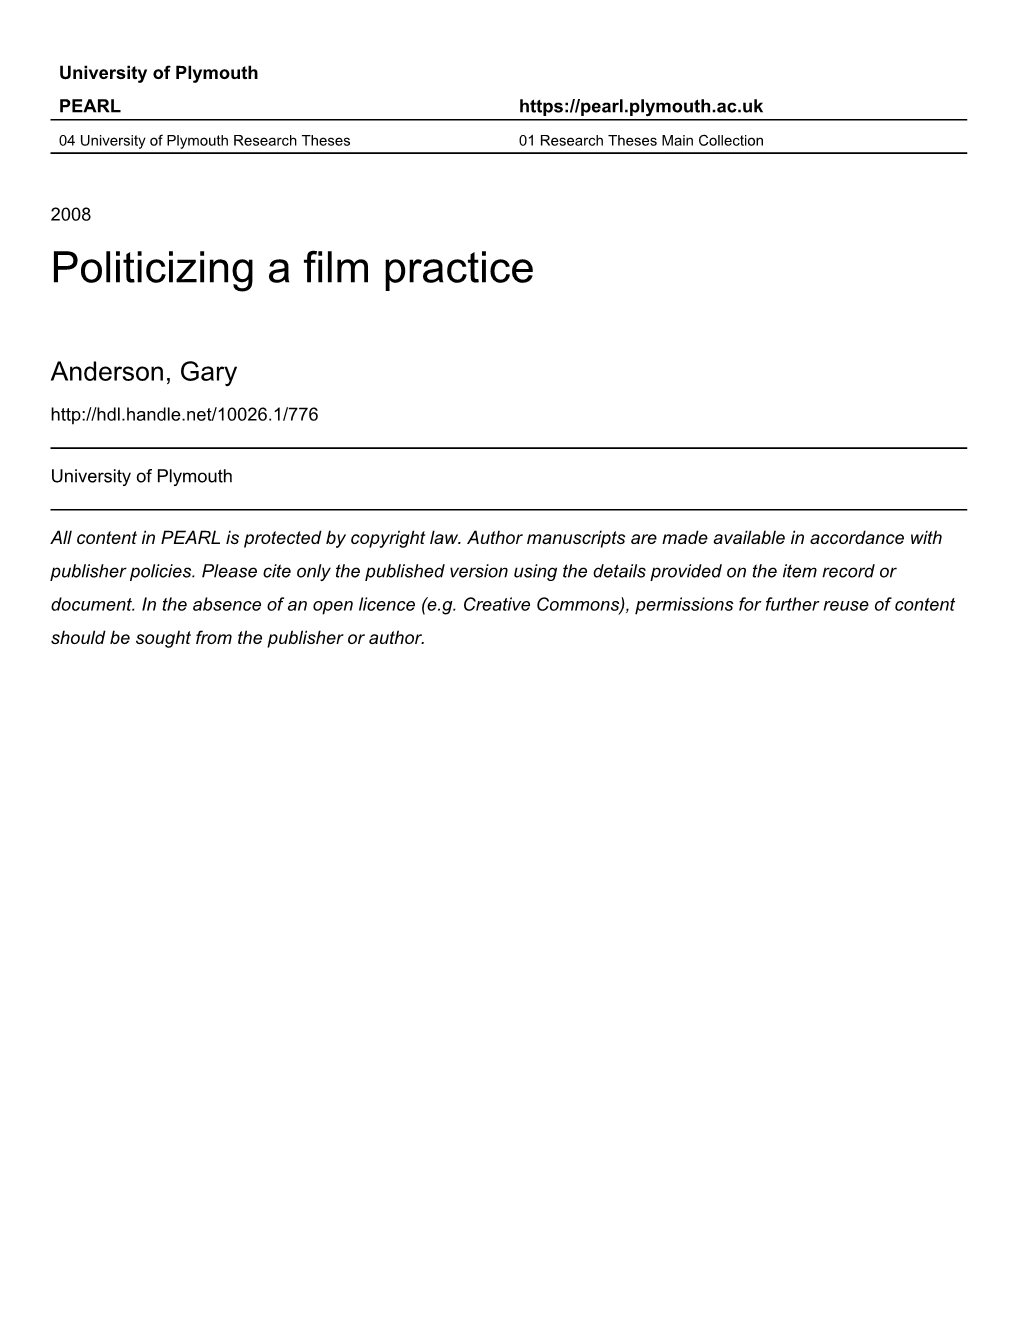 By Gary Anderson a Thesis Submitted to the University of Plymouth in Partial Fulfilment for the Degree of School of Media and Ph